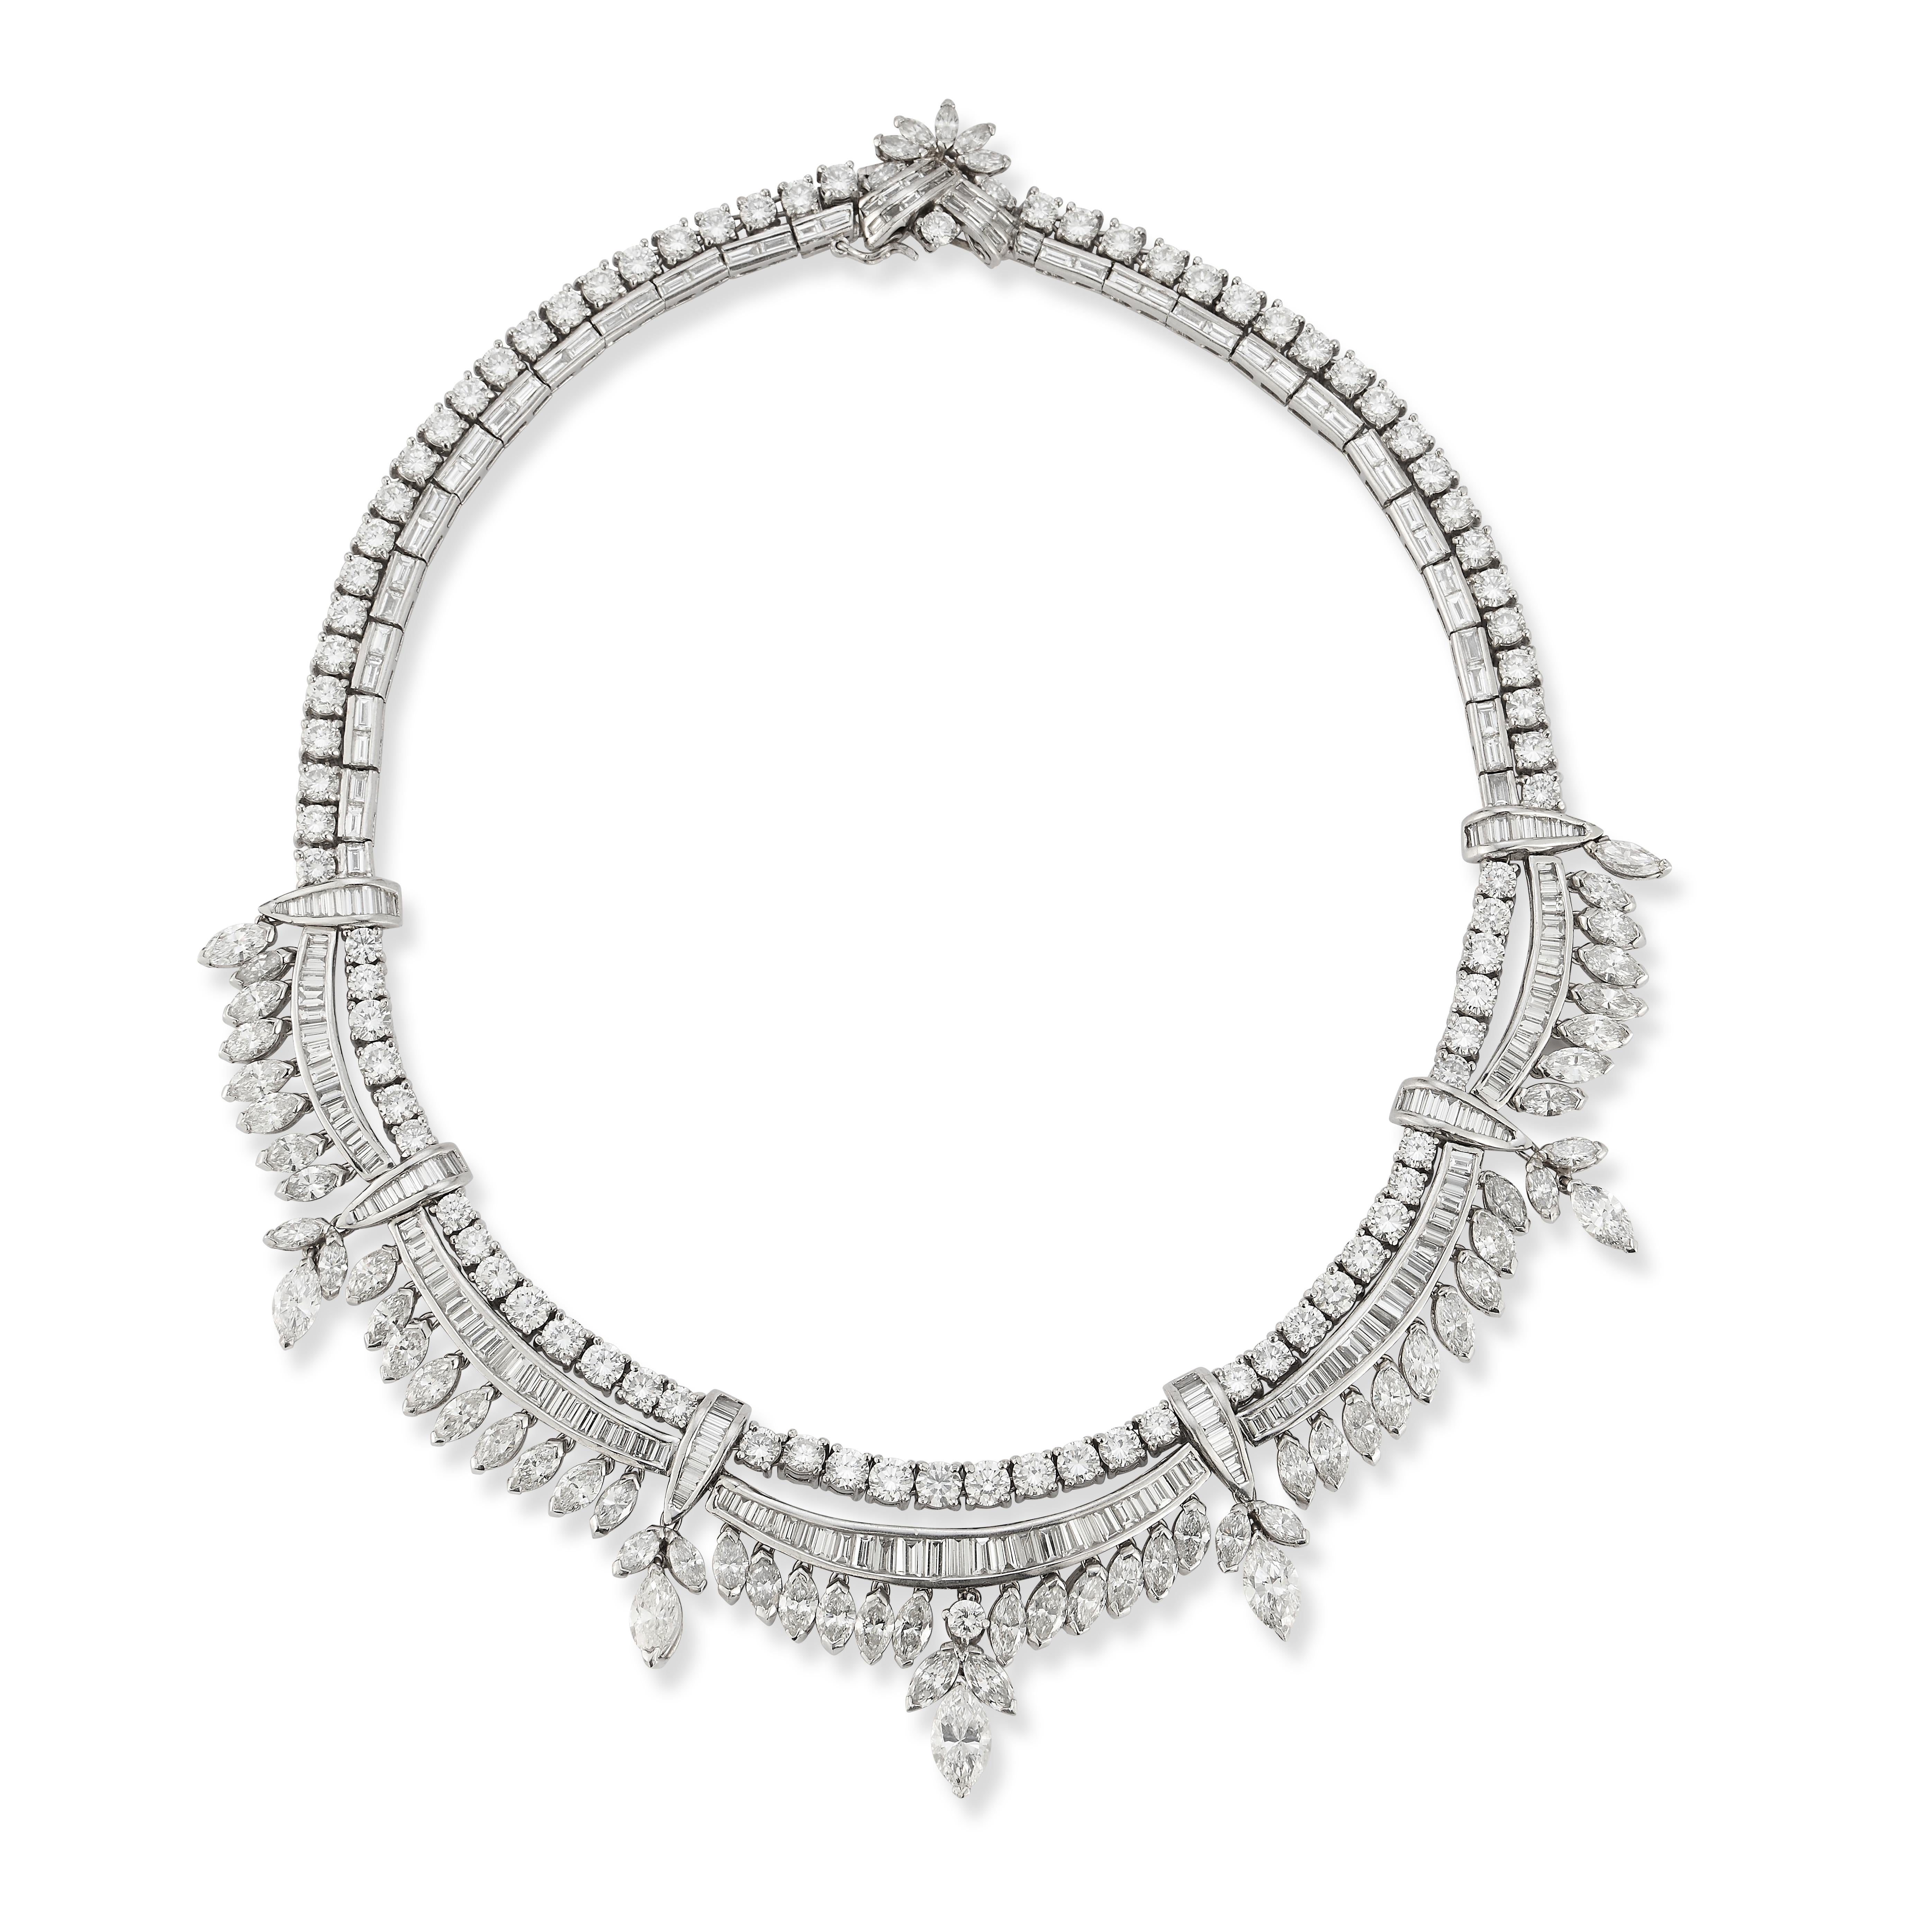 Mid Century Diamond Necklace

A platinum necklace set with 83 round cut diamonds, 66 marquise cut diamonds, and 204 baguette cut diamonds with a total approximate Diamond Weight of 60.45 carats
Approximate Color Grade: G-H
Approximate Clarity Grade: